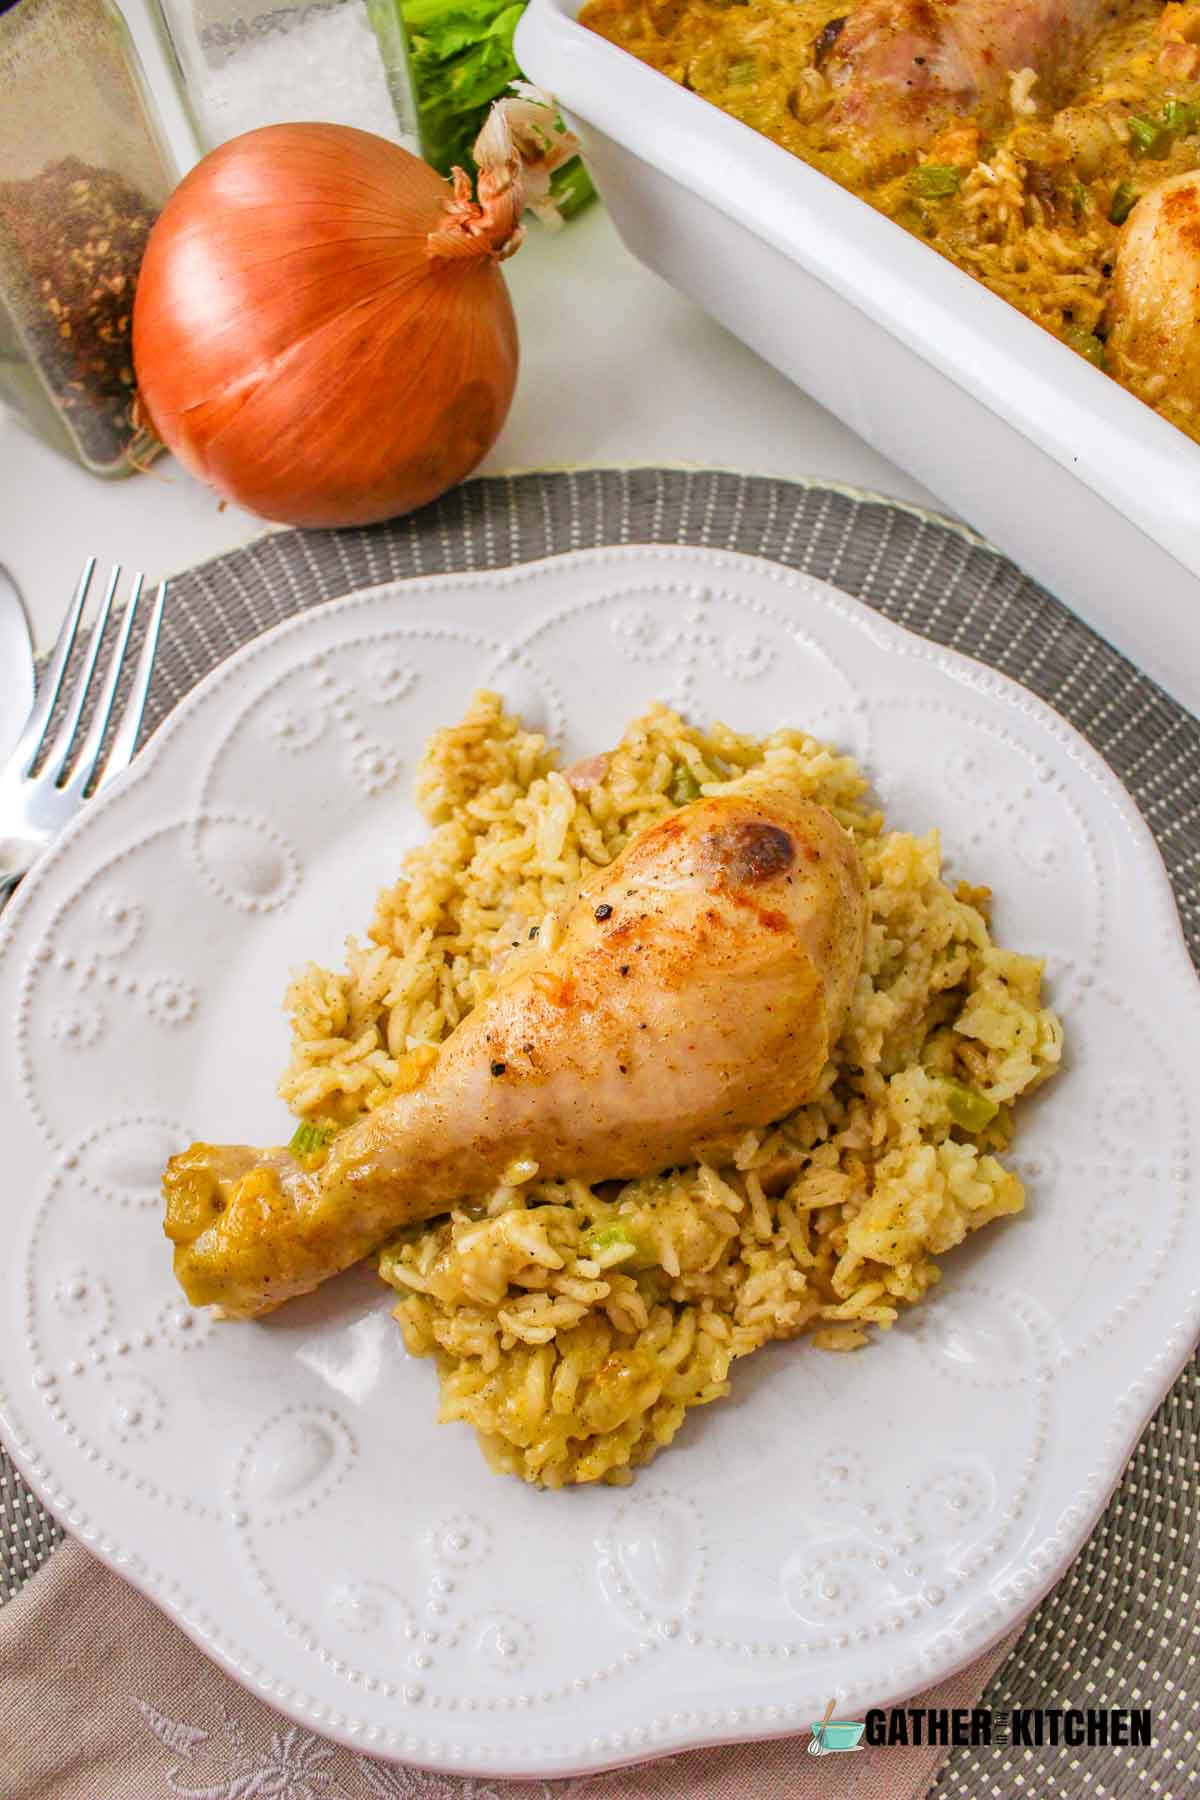 A piece of creamy chicken drumstick on a bed of rice.